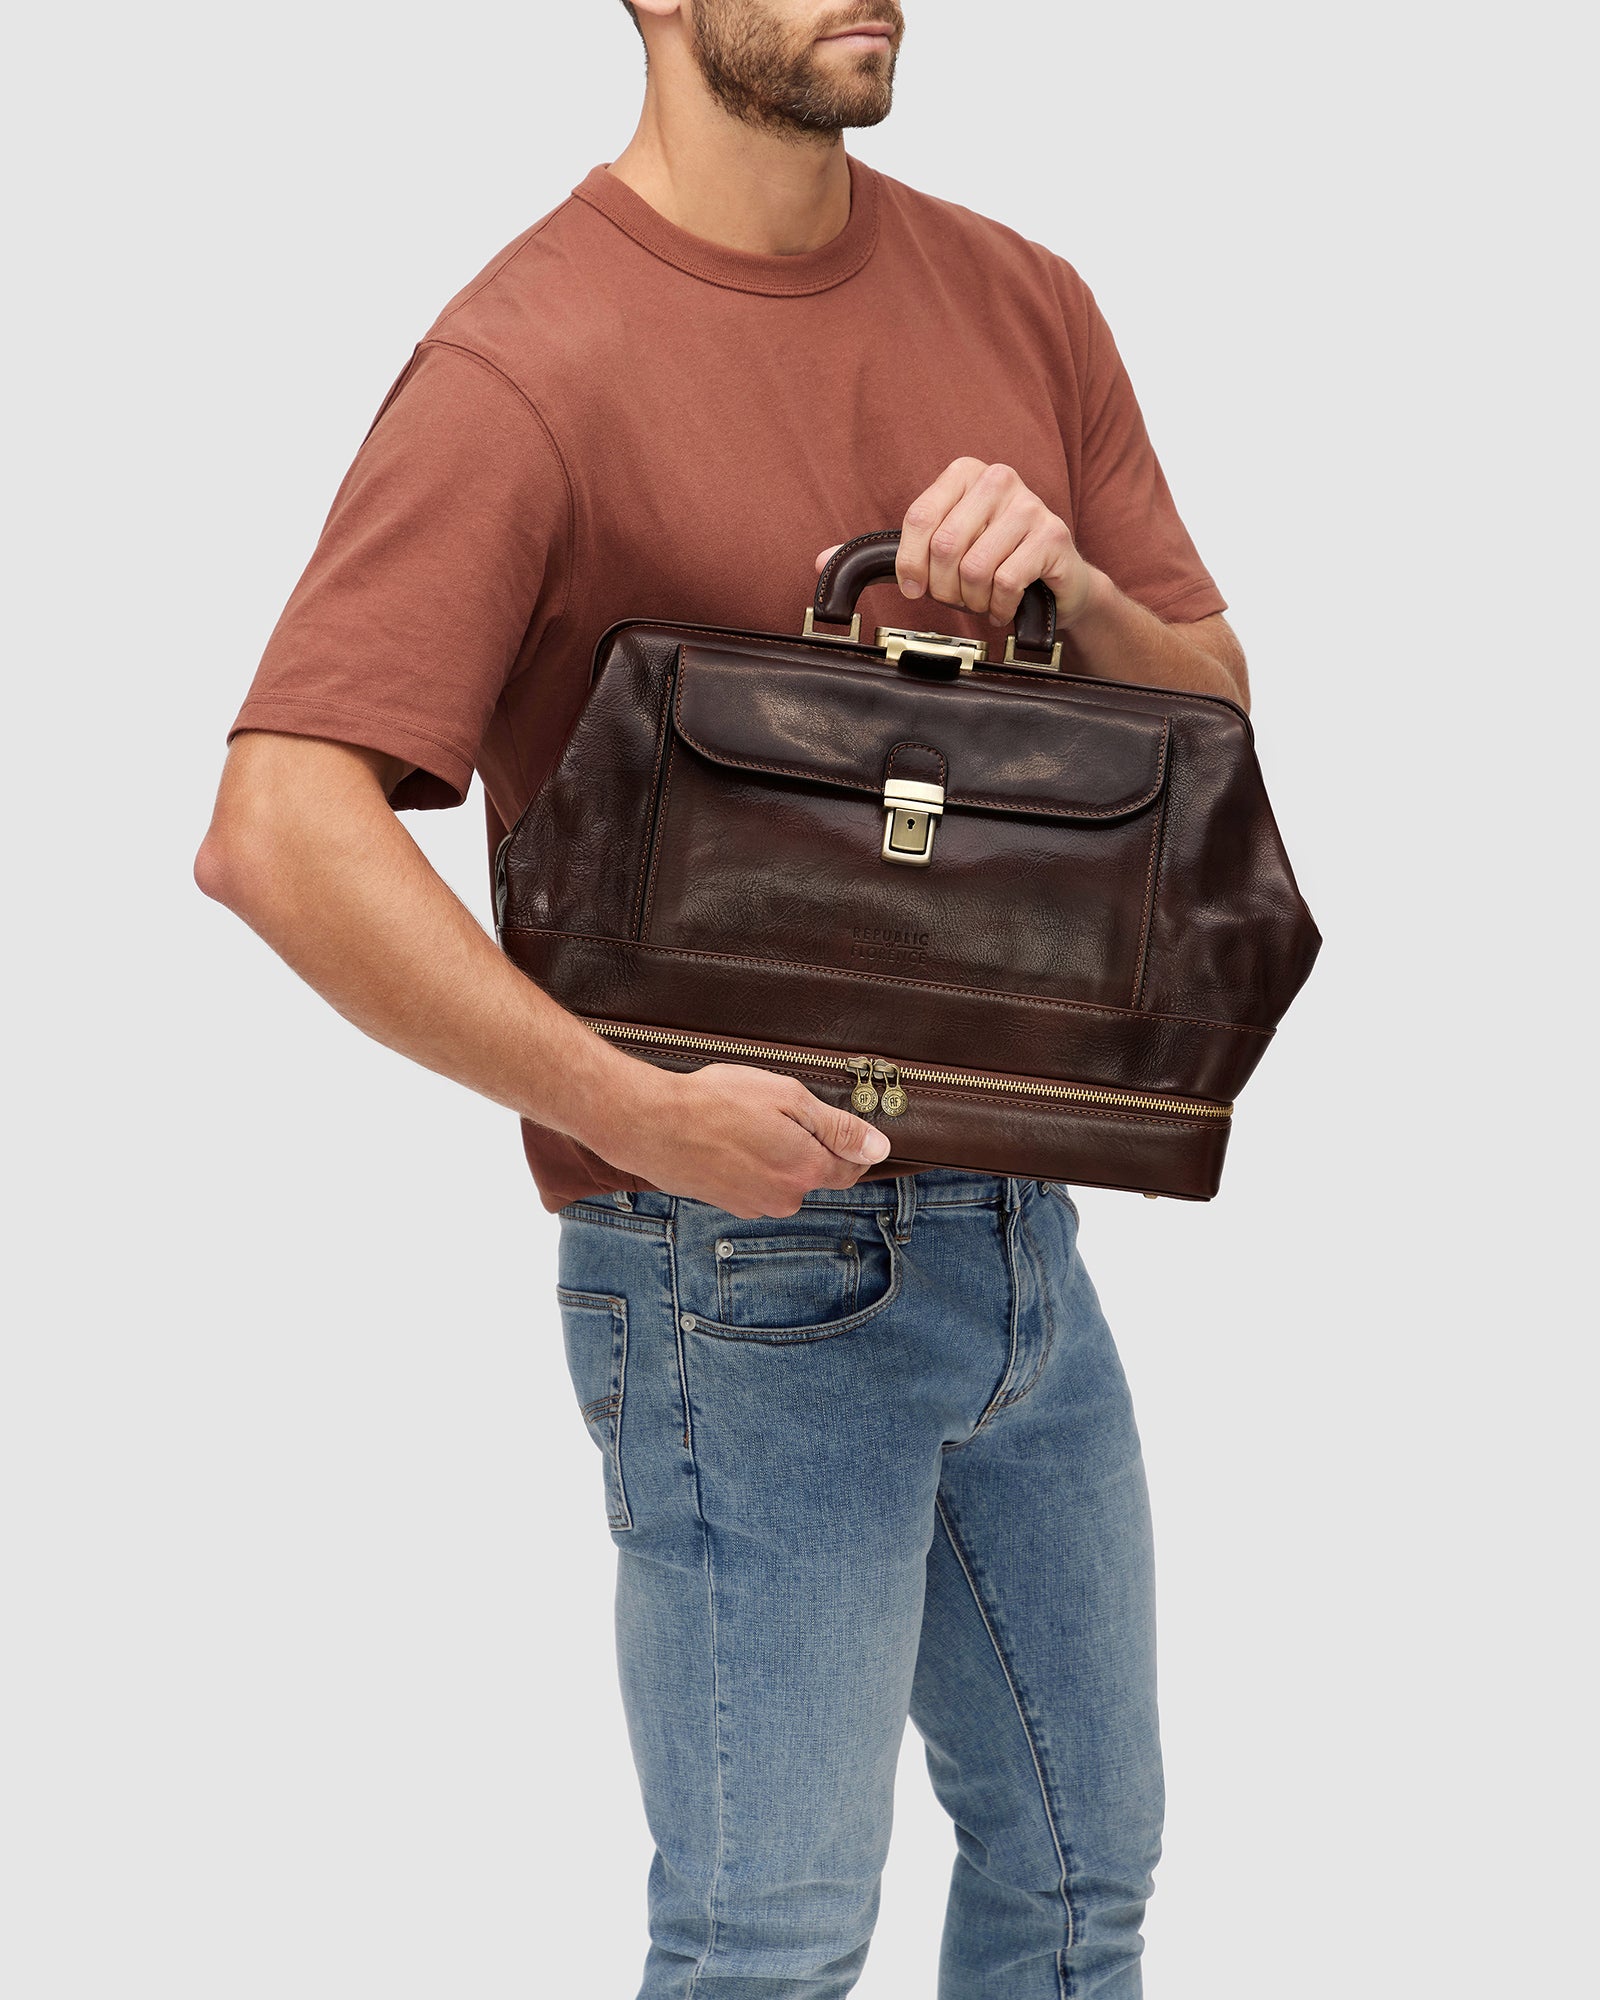 Hippocrates Brown - Leather Doctor Bag